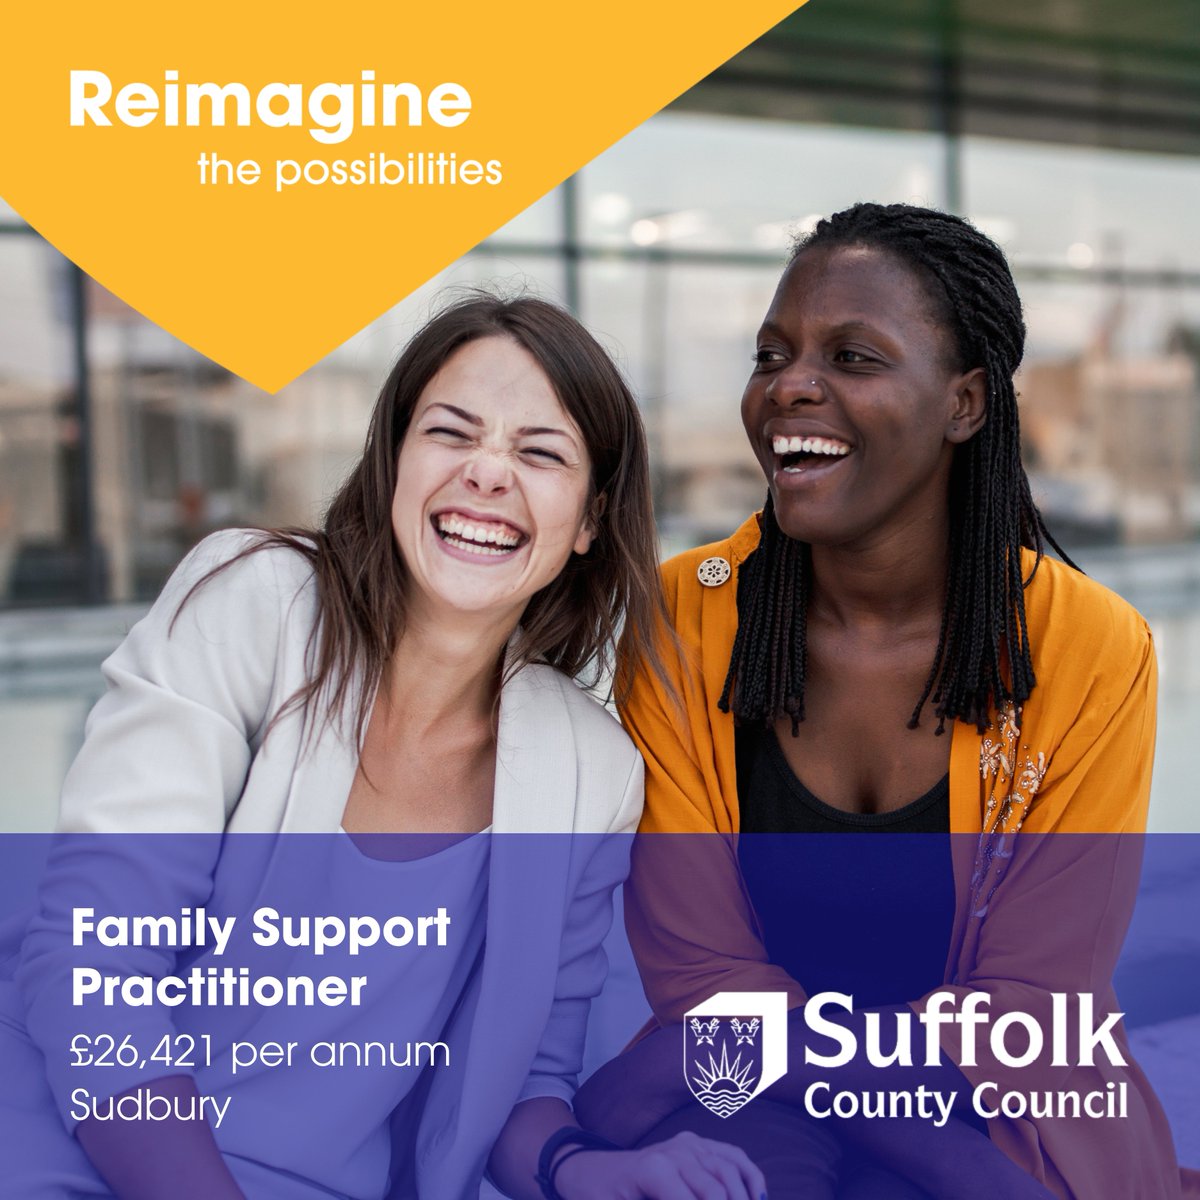 Family Support Practitioner
Suffolk County Council – Uplands Offices, Sudbury CO10 1NF - Community based

For more information and to apply for this job, please visit: suffolkjobsdirect.org/#en/sites/CX_1…

#SudburyJobs #suffolkjobs #suffolkjobsdirect
@JCPInSuffolk